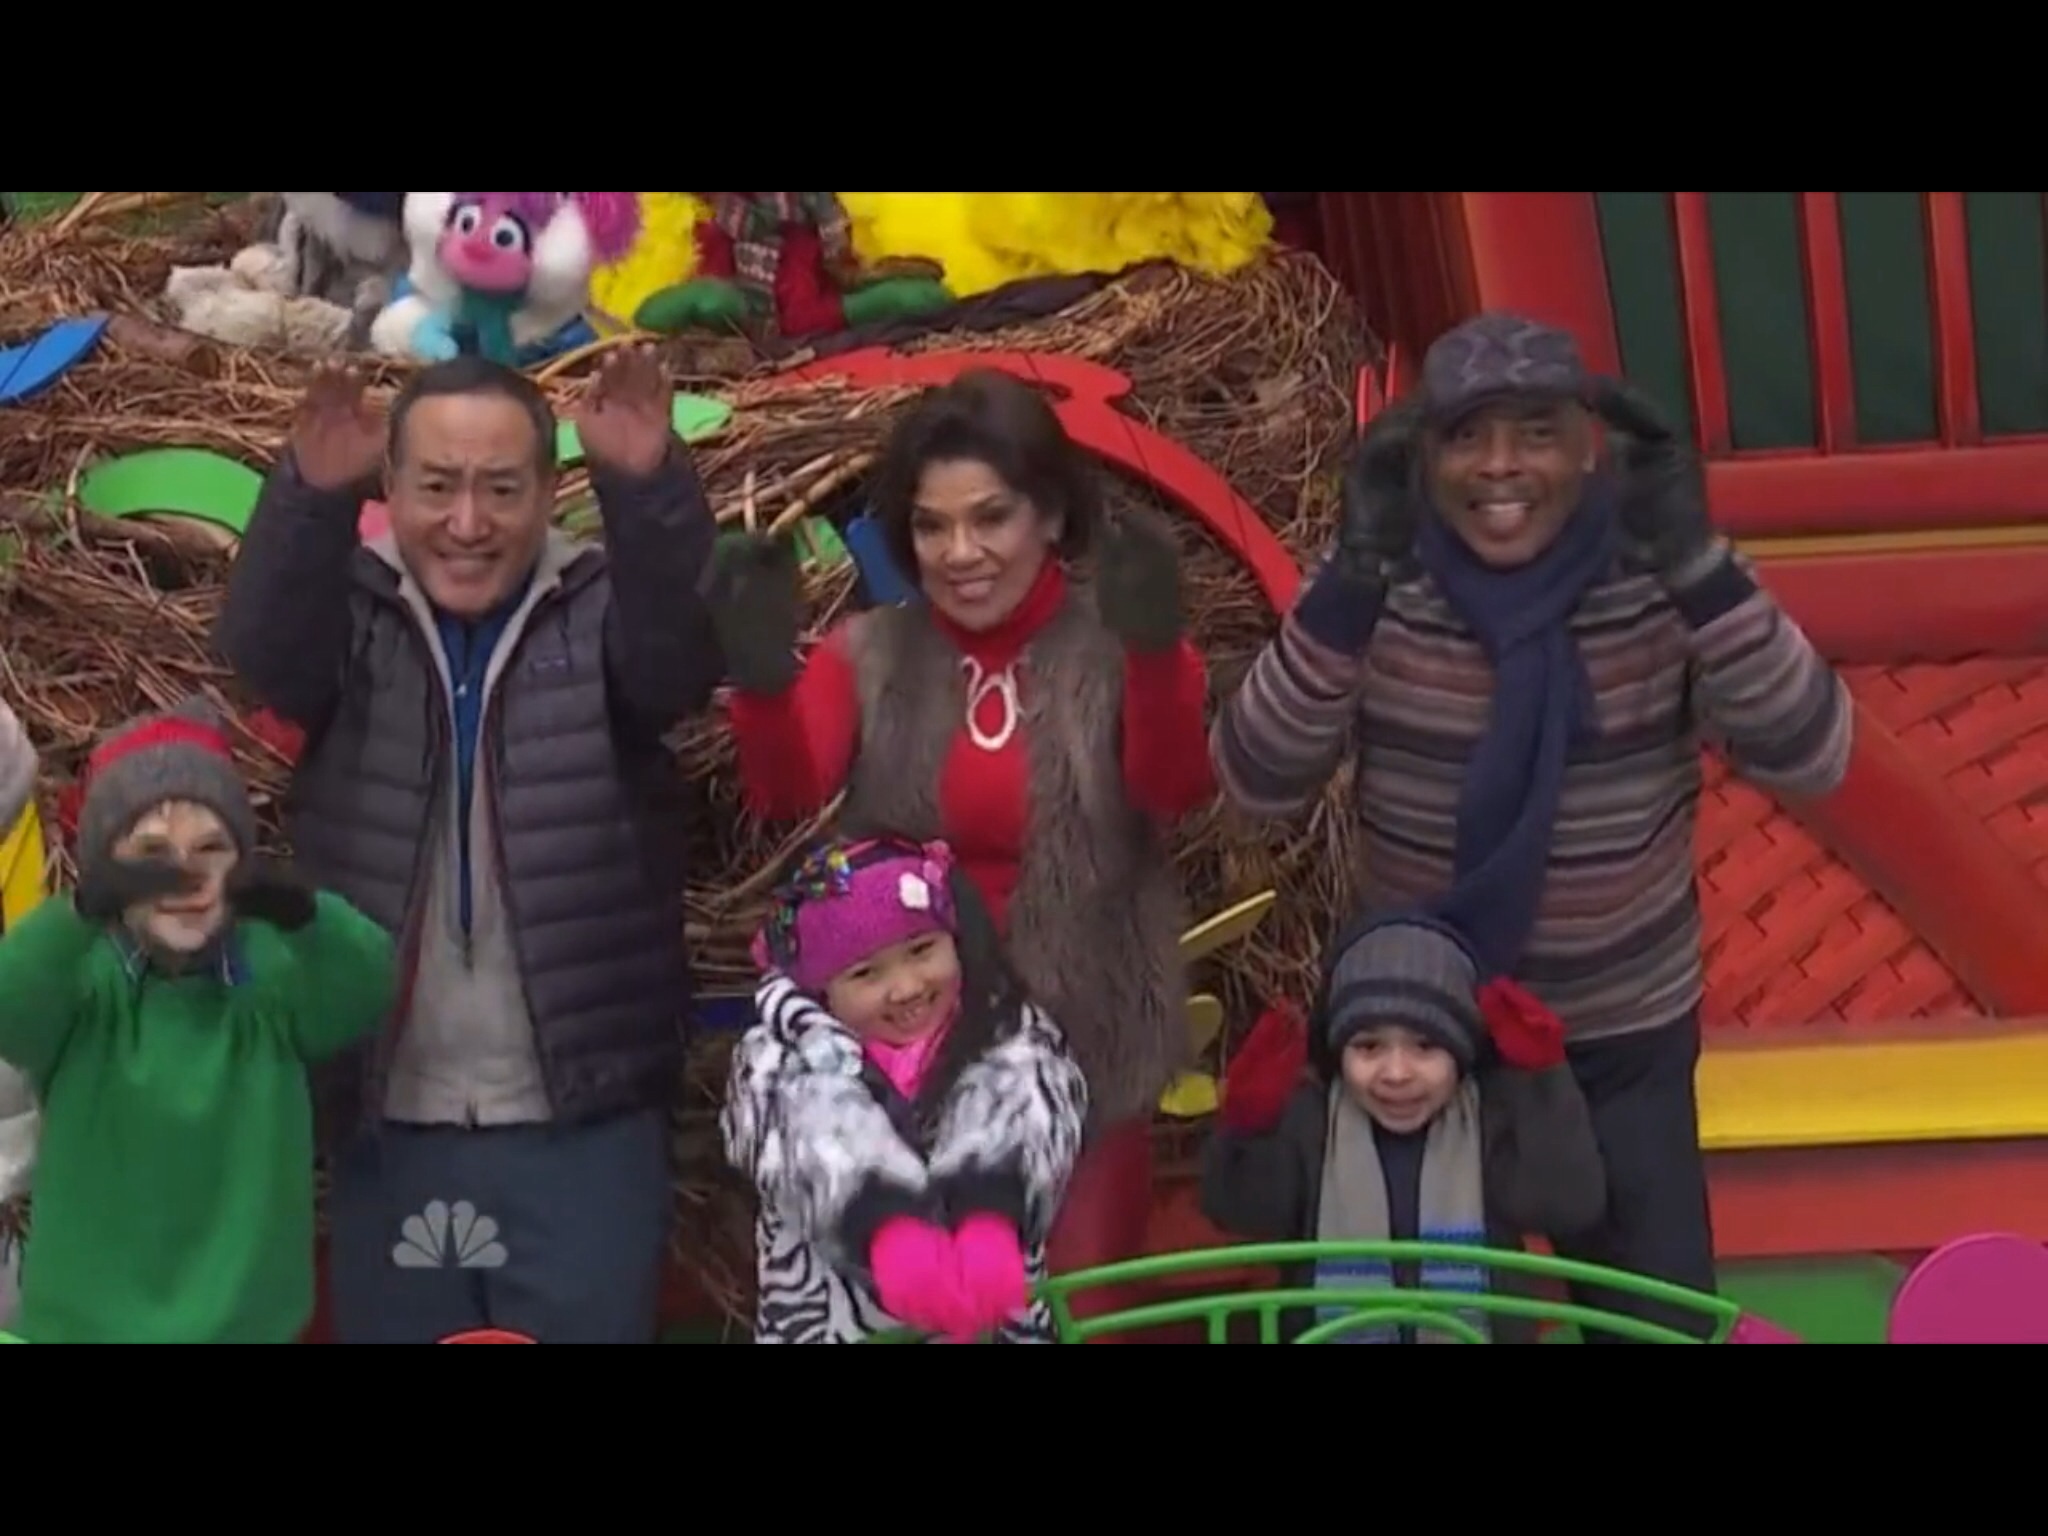 Raina Cheng & cast of a Sesame Street performing on the Sesame Street float at the 88th Macy's Thanksgiving Day Parade. 2014